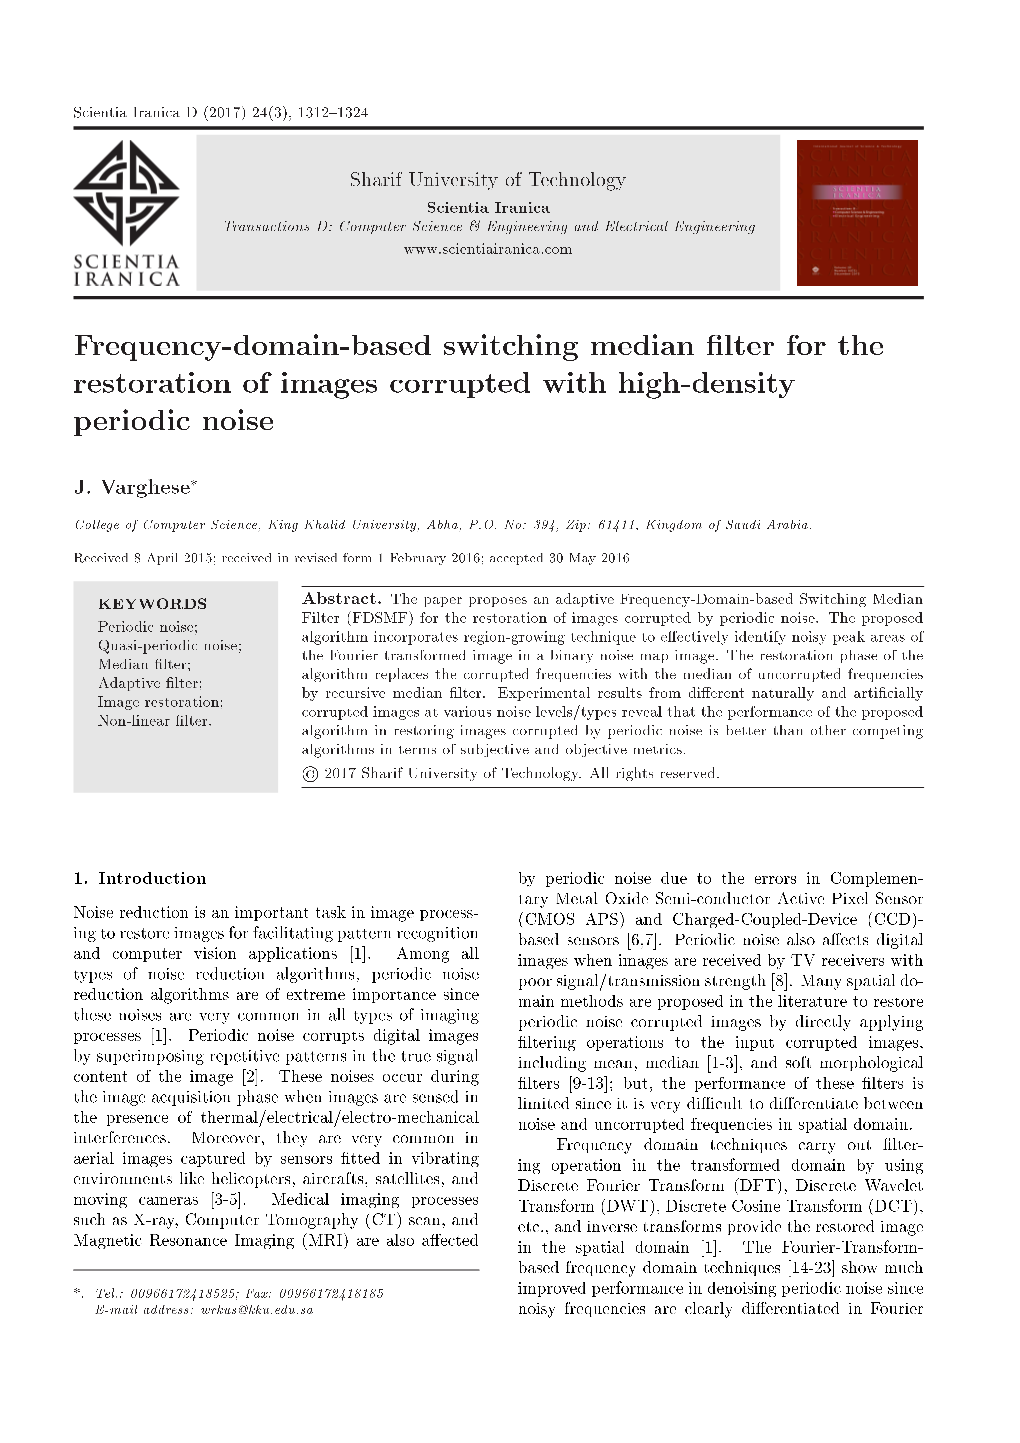 Frequency-Domain-Based Switching Median Lter for the Restoration of Images Corrupted with High-Density Periodic Noise